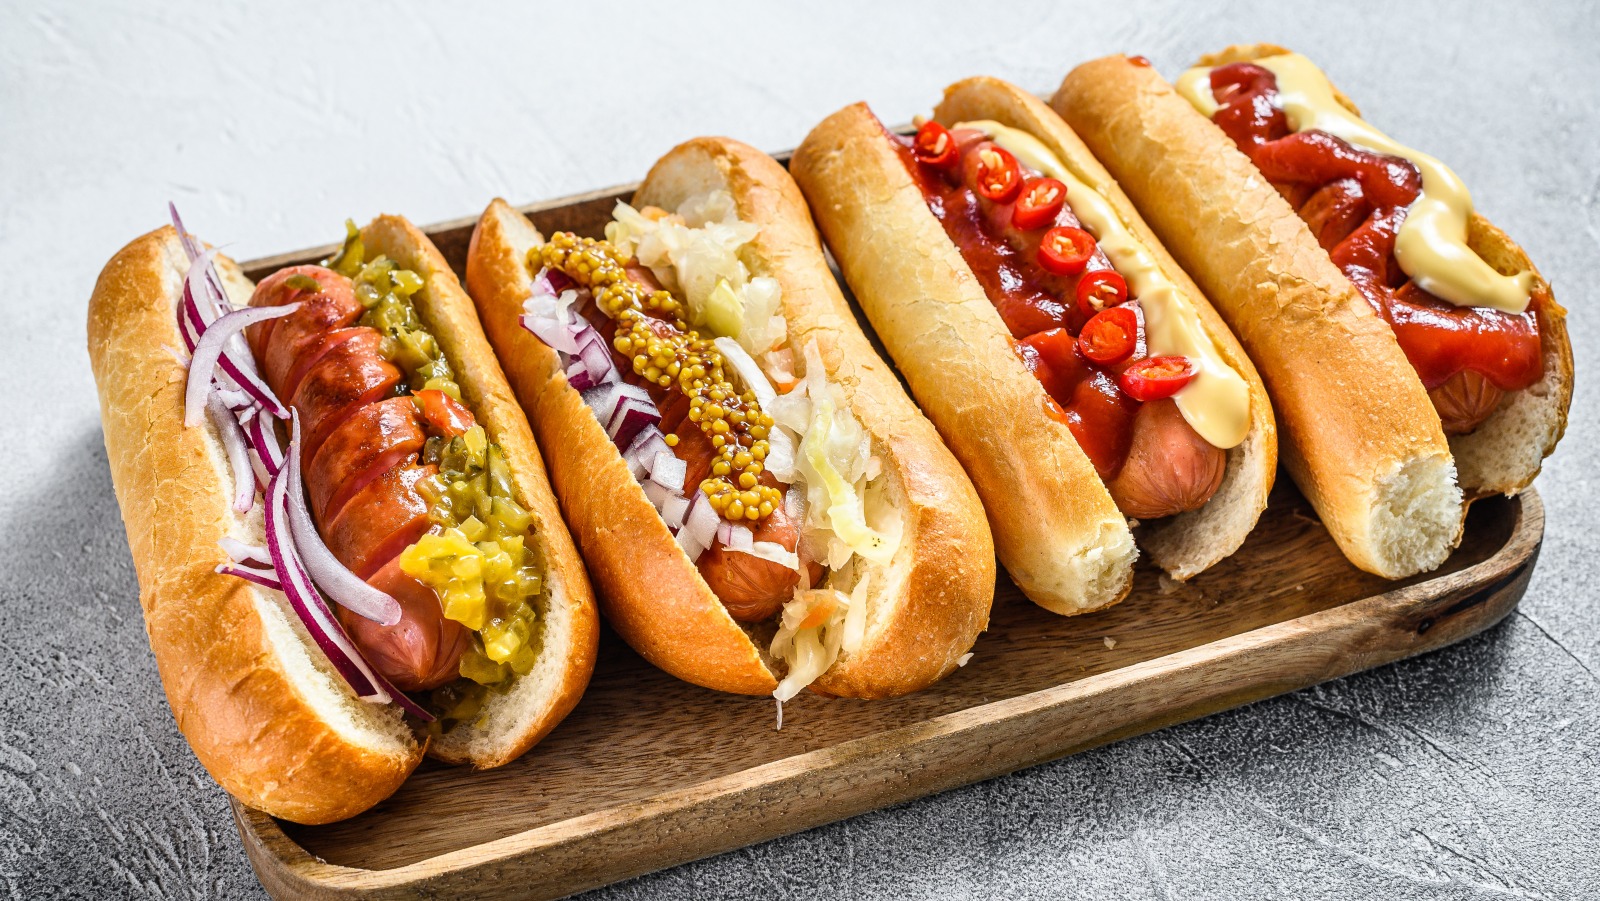 Seven great places in eastern MA to get a delicious hot dog